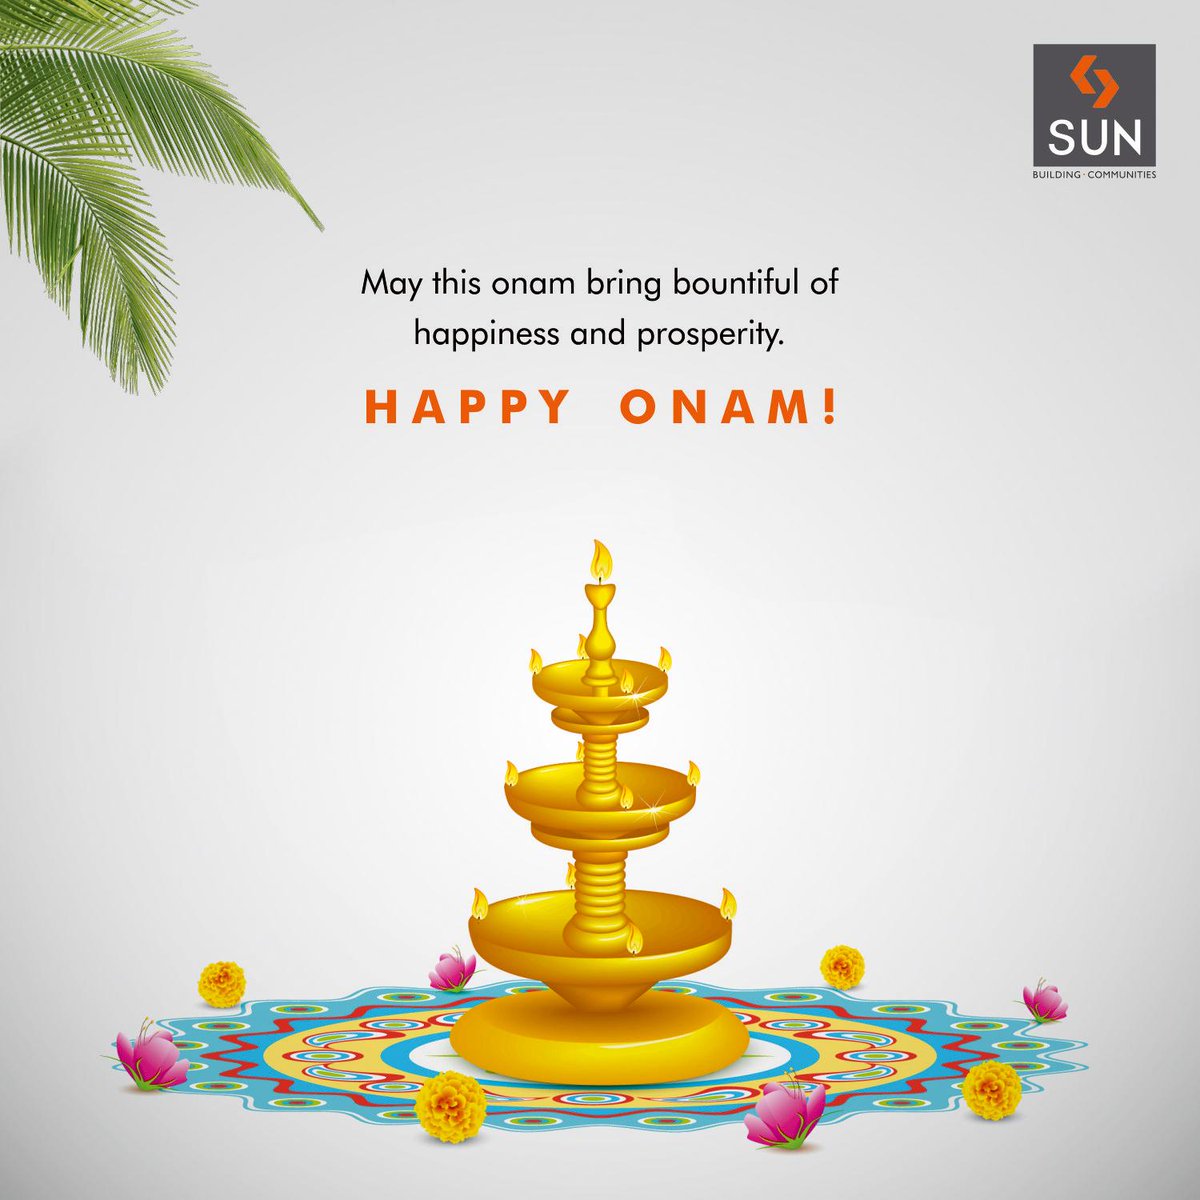 Sun Builders Group wishes everyone a very Happy Onam today! http://t.co/qay61BuAFN